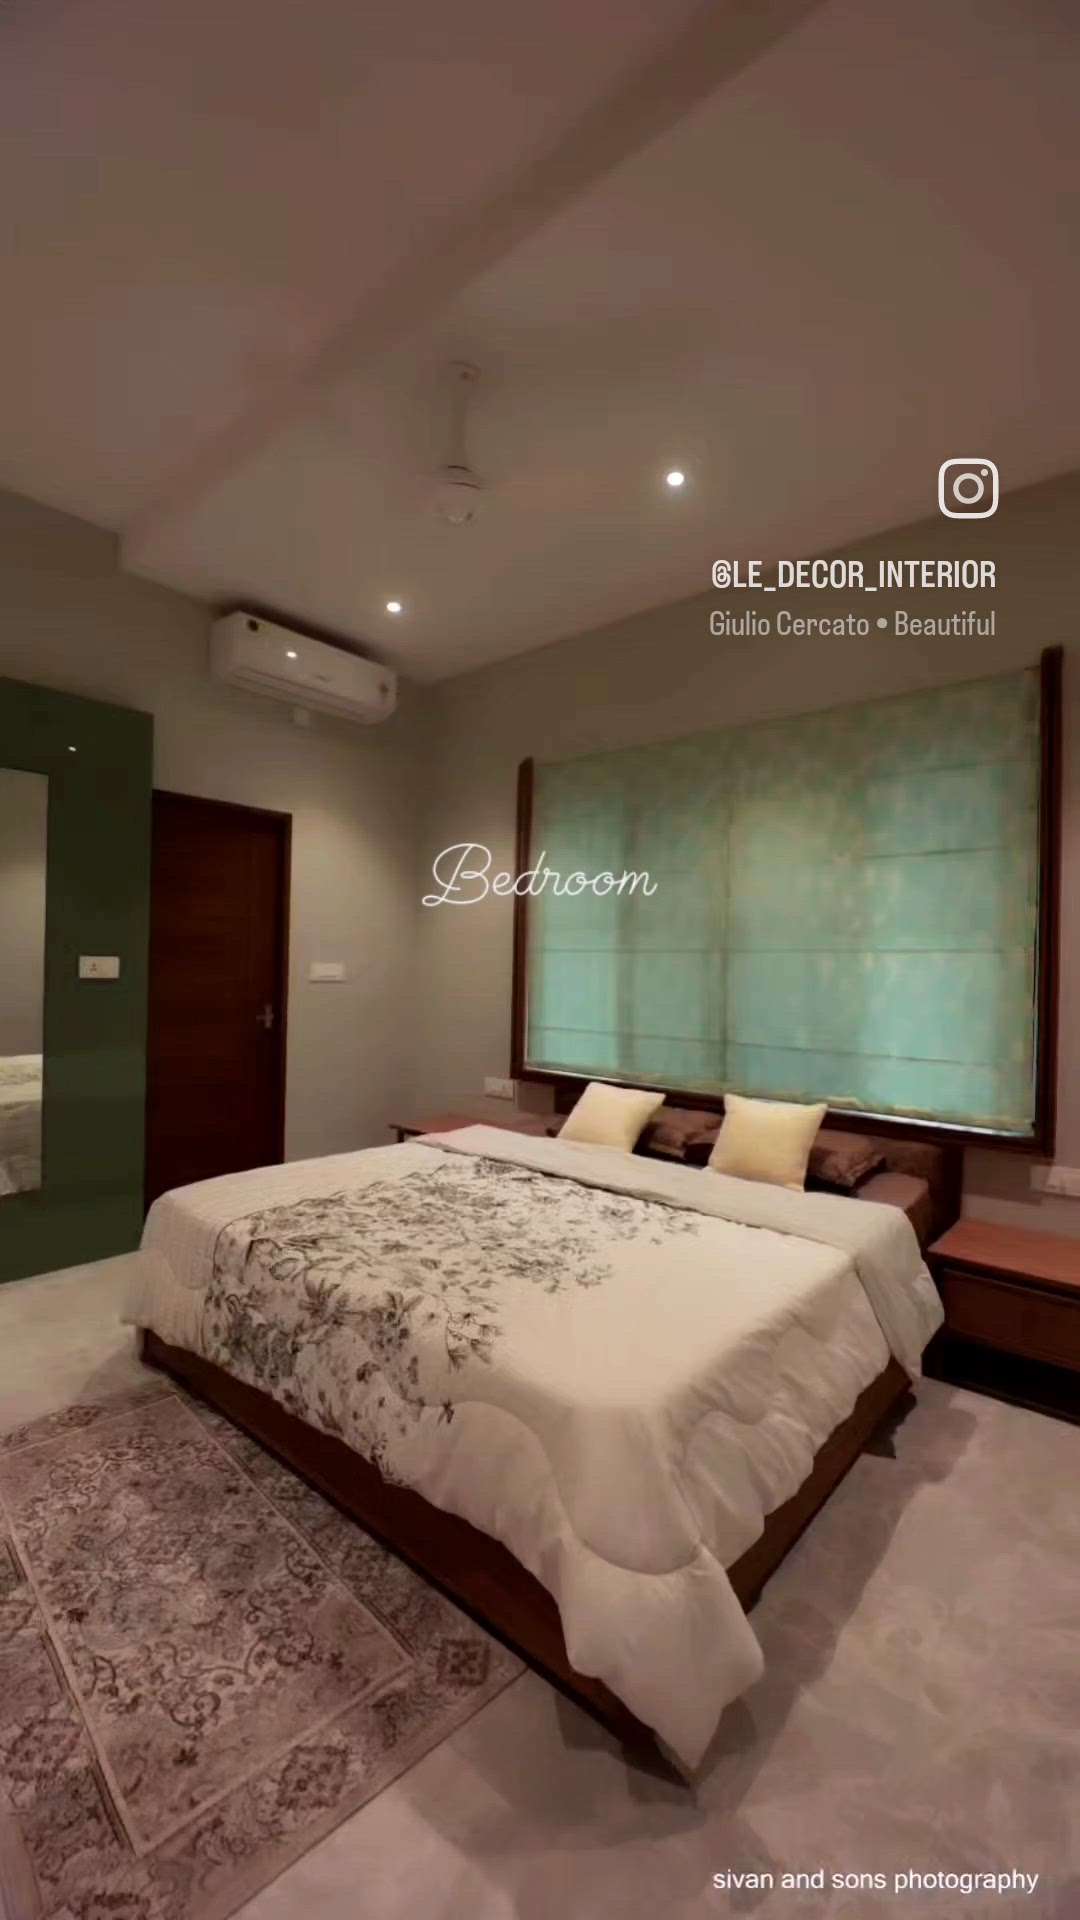 "We will fulfill the customer's dream bedroom in a limited time. Our expert team will create a clean and awesome Bedroom interior for the client. #happyclients 

contact for : 8714716390

 #BedroomDecor #interirowork #calicutdesigners #BedroomDecor #MasterBedroom #roomdecoration